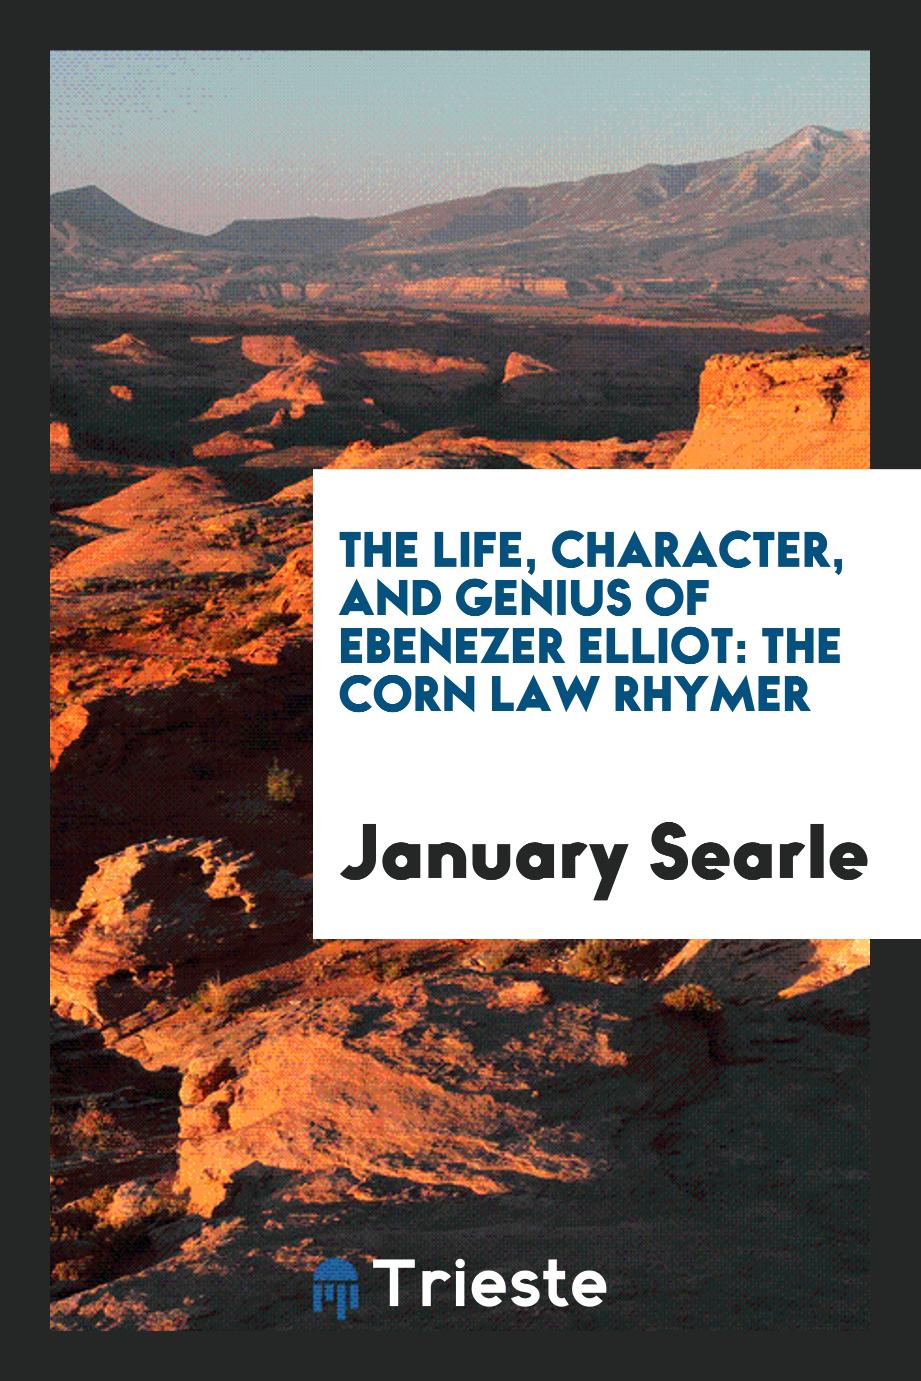 The Life, Character, and Genius of Ebenezer Elliot: The Corn Law Rhymer